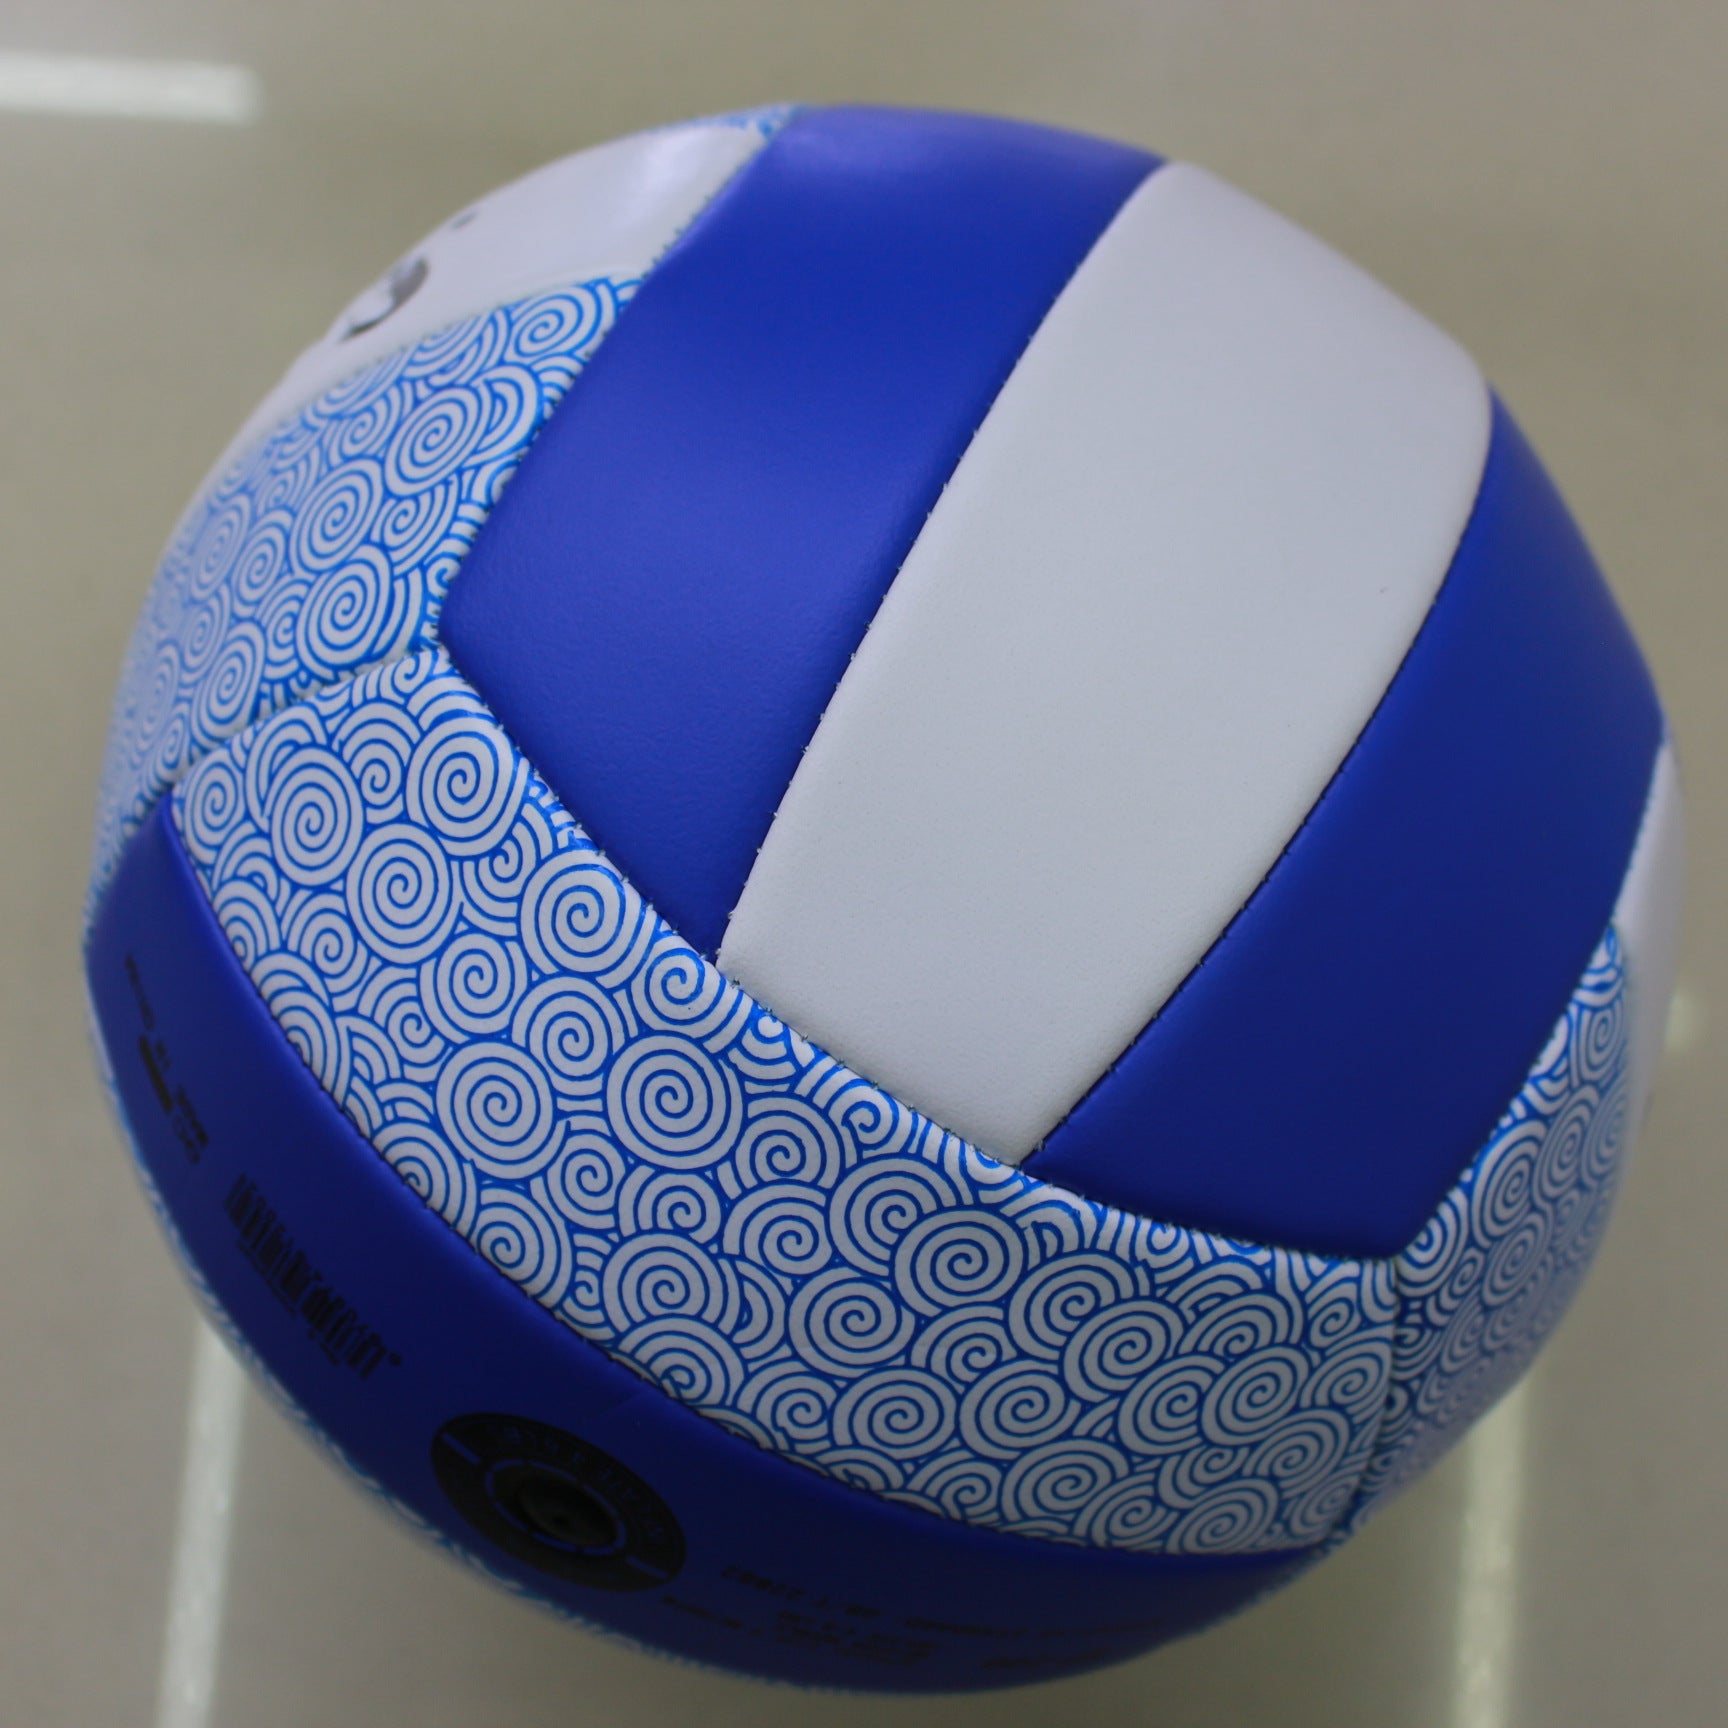 WILKYs0Genuine No. 5 Volleyball Blue and White Porcelain High-foaming Volleyb
 Product information:
 
 Material: PU
 
 Stitching method: machine stitch
 
 Specification: No. 5
 
 Color: blue and white 200


 


 Packing list：

volleyball X1

